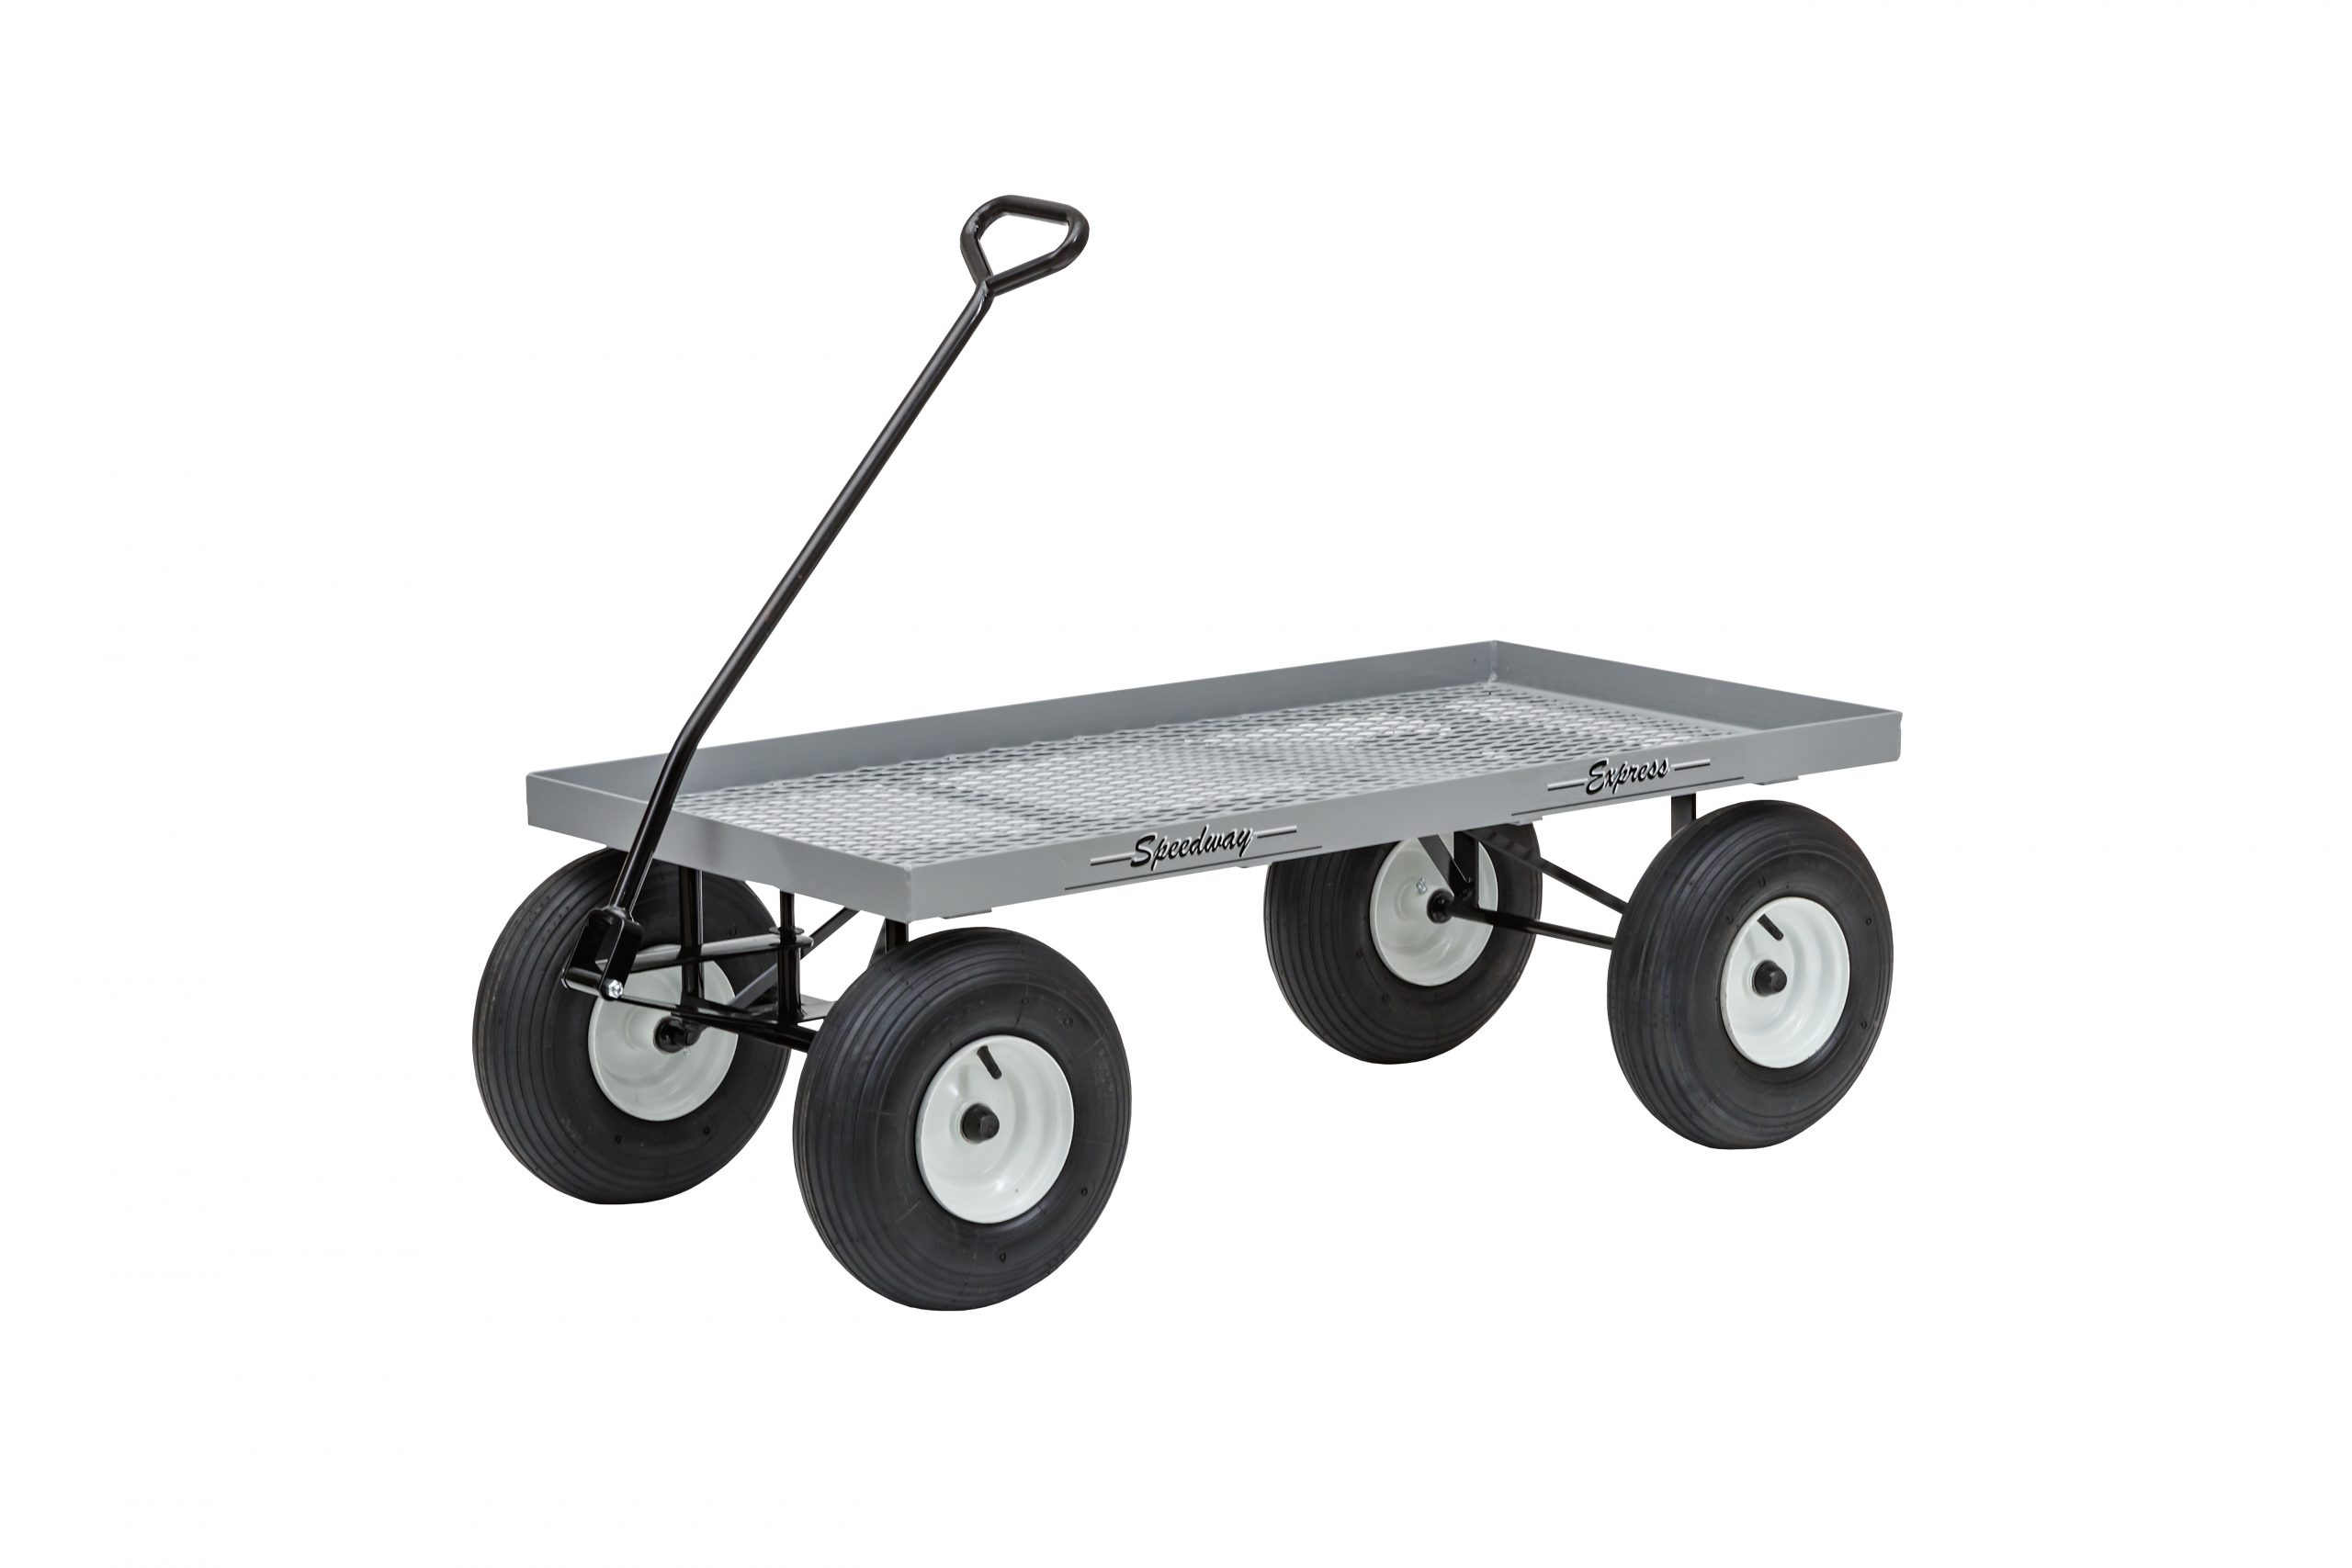 THE PERFECT ALL AROUND FISHING WAGON! All aluminum welded, heavy